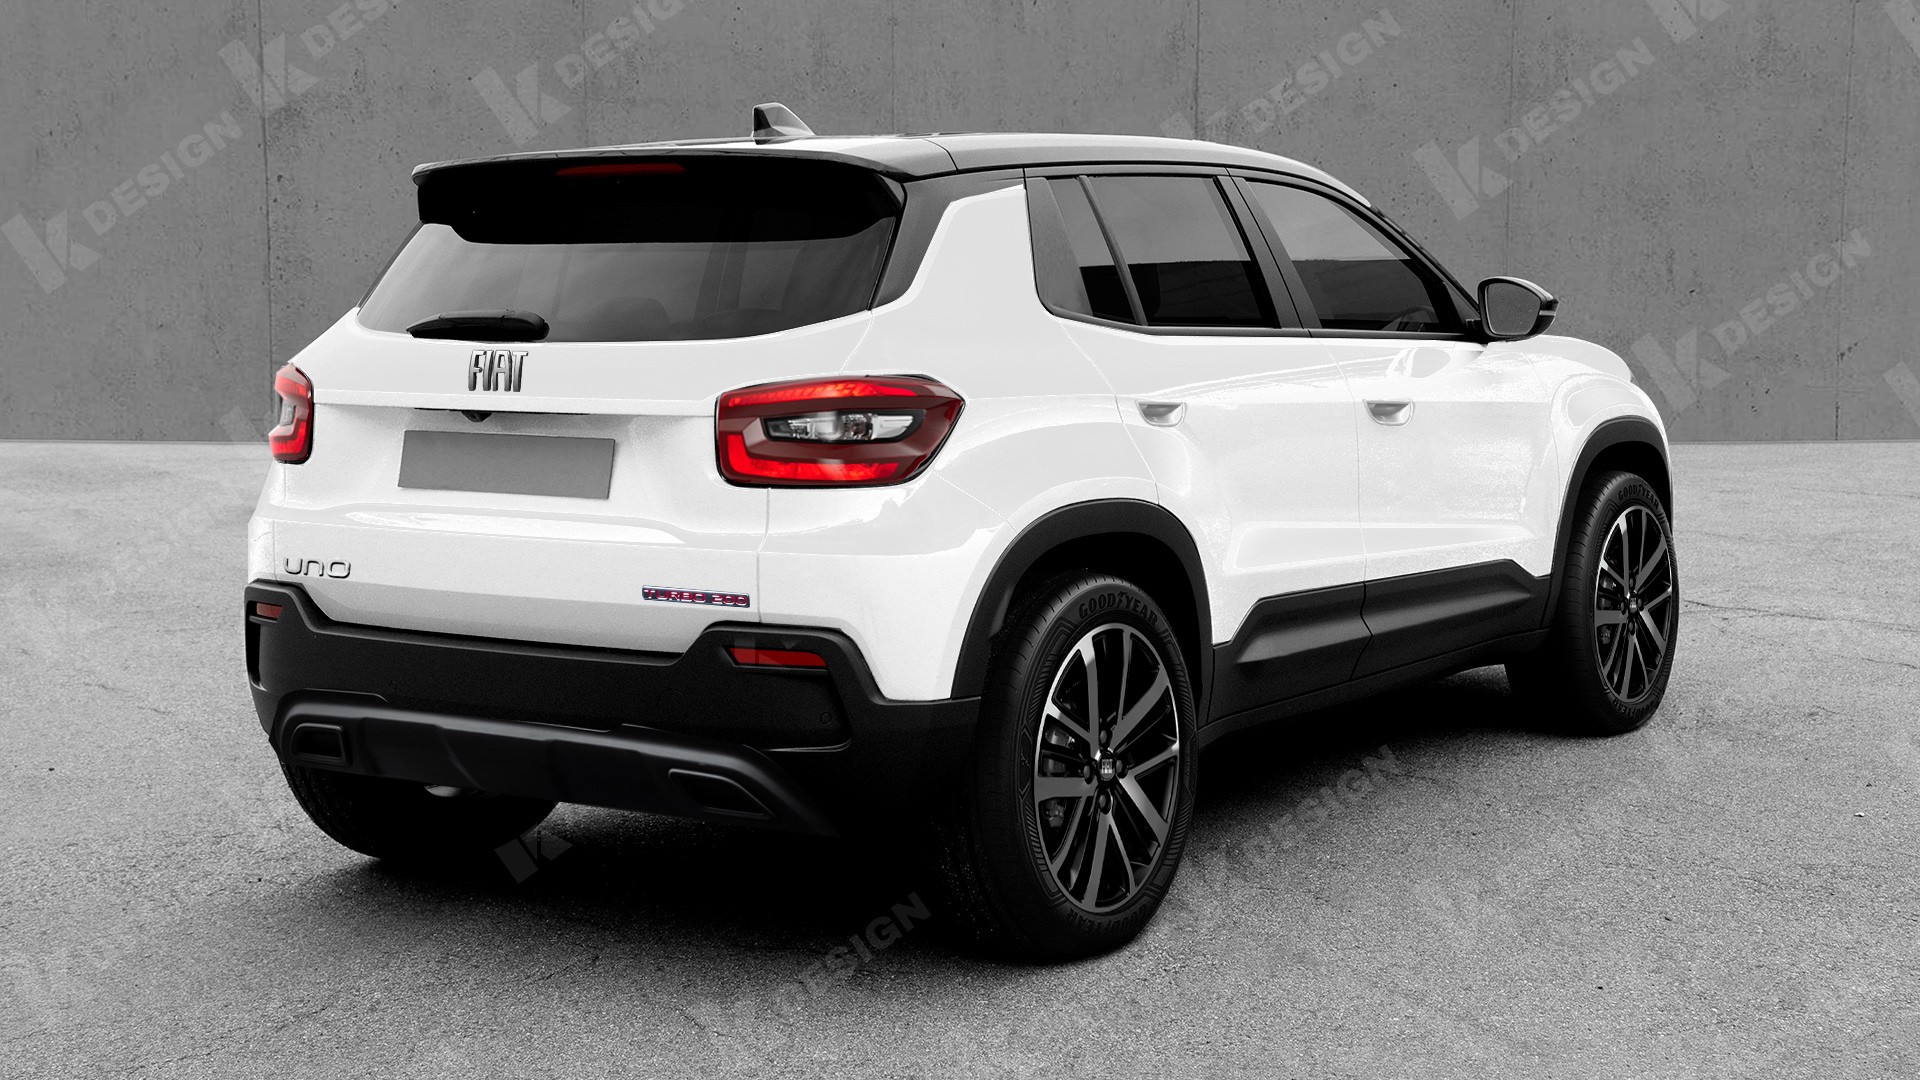 2023 fiat uno morphs jeep ev into ice subcompact crossover suv to set itself apart 1